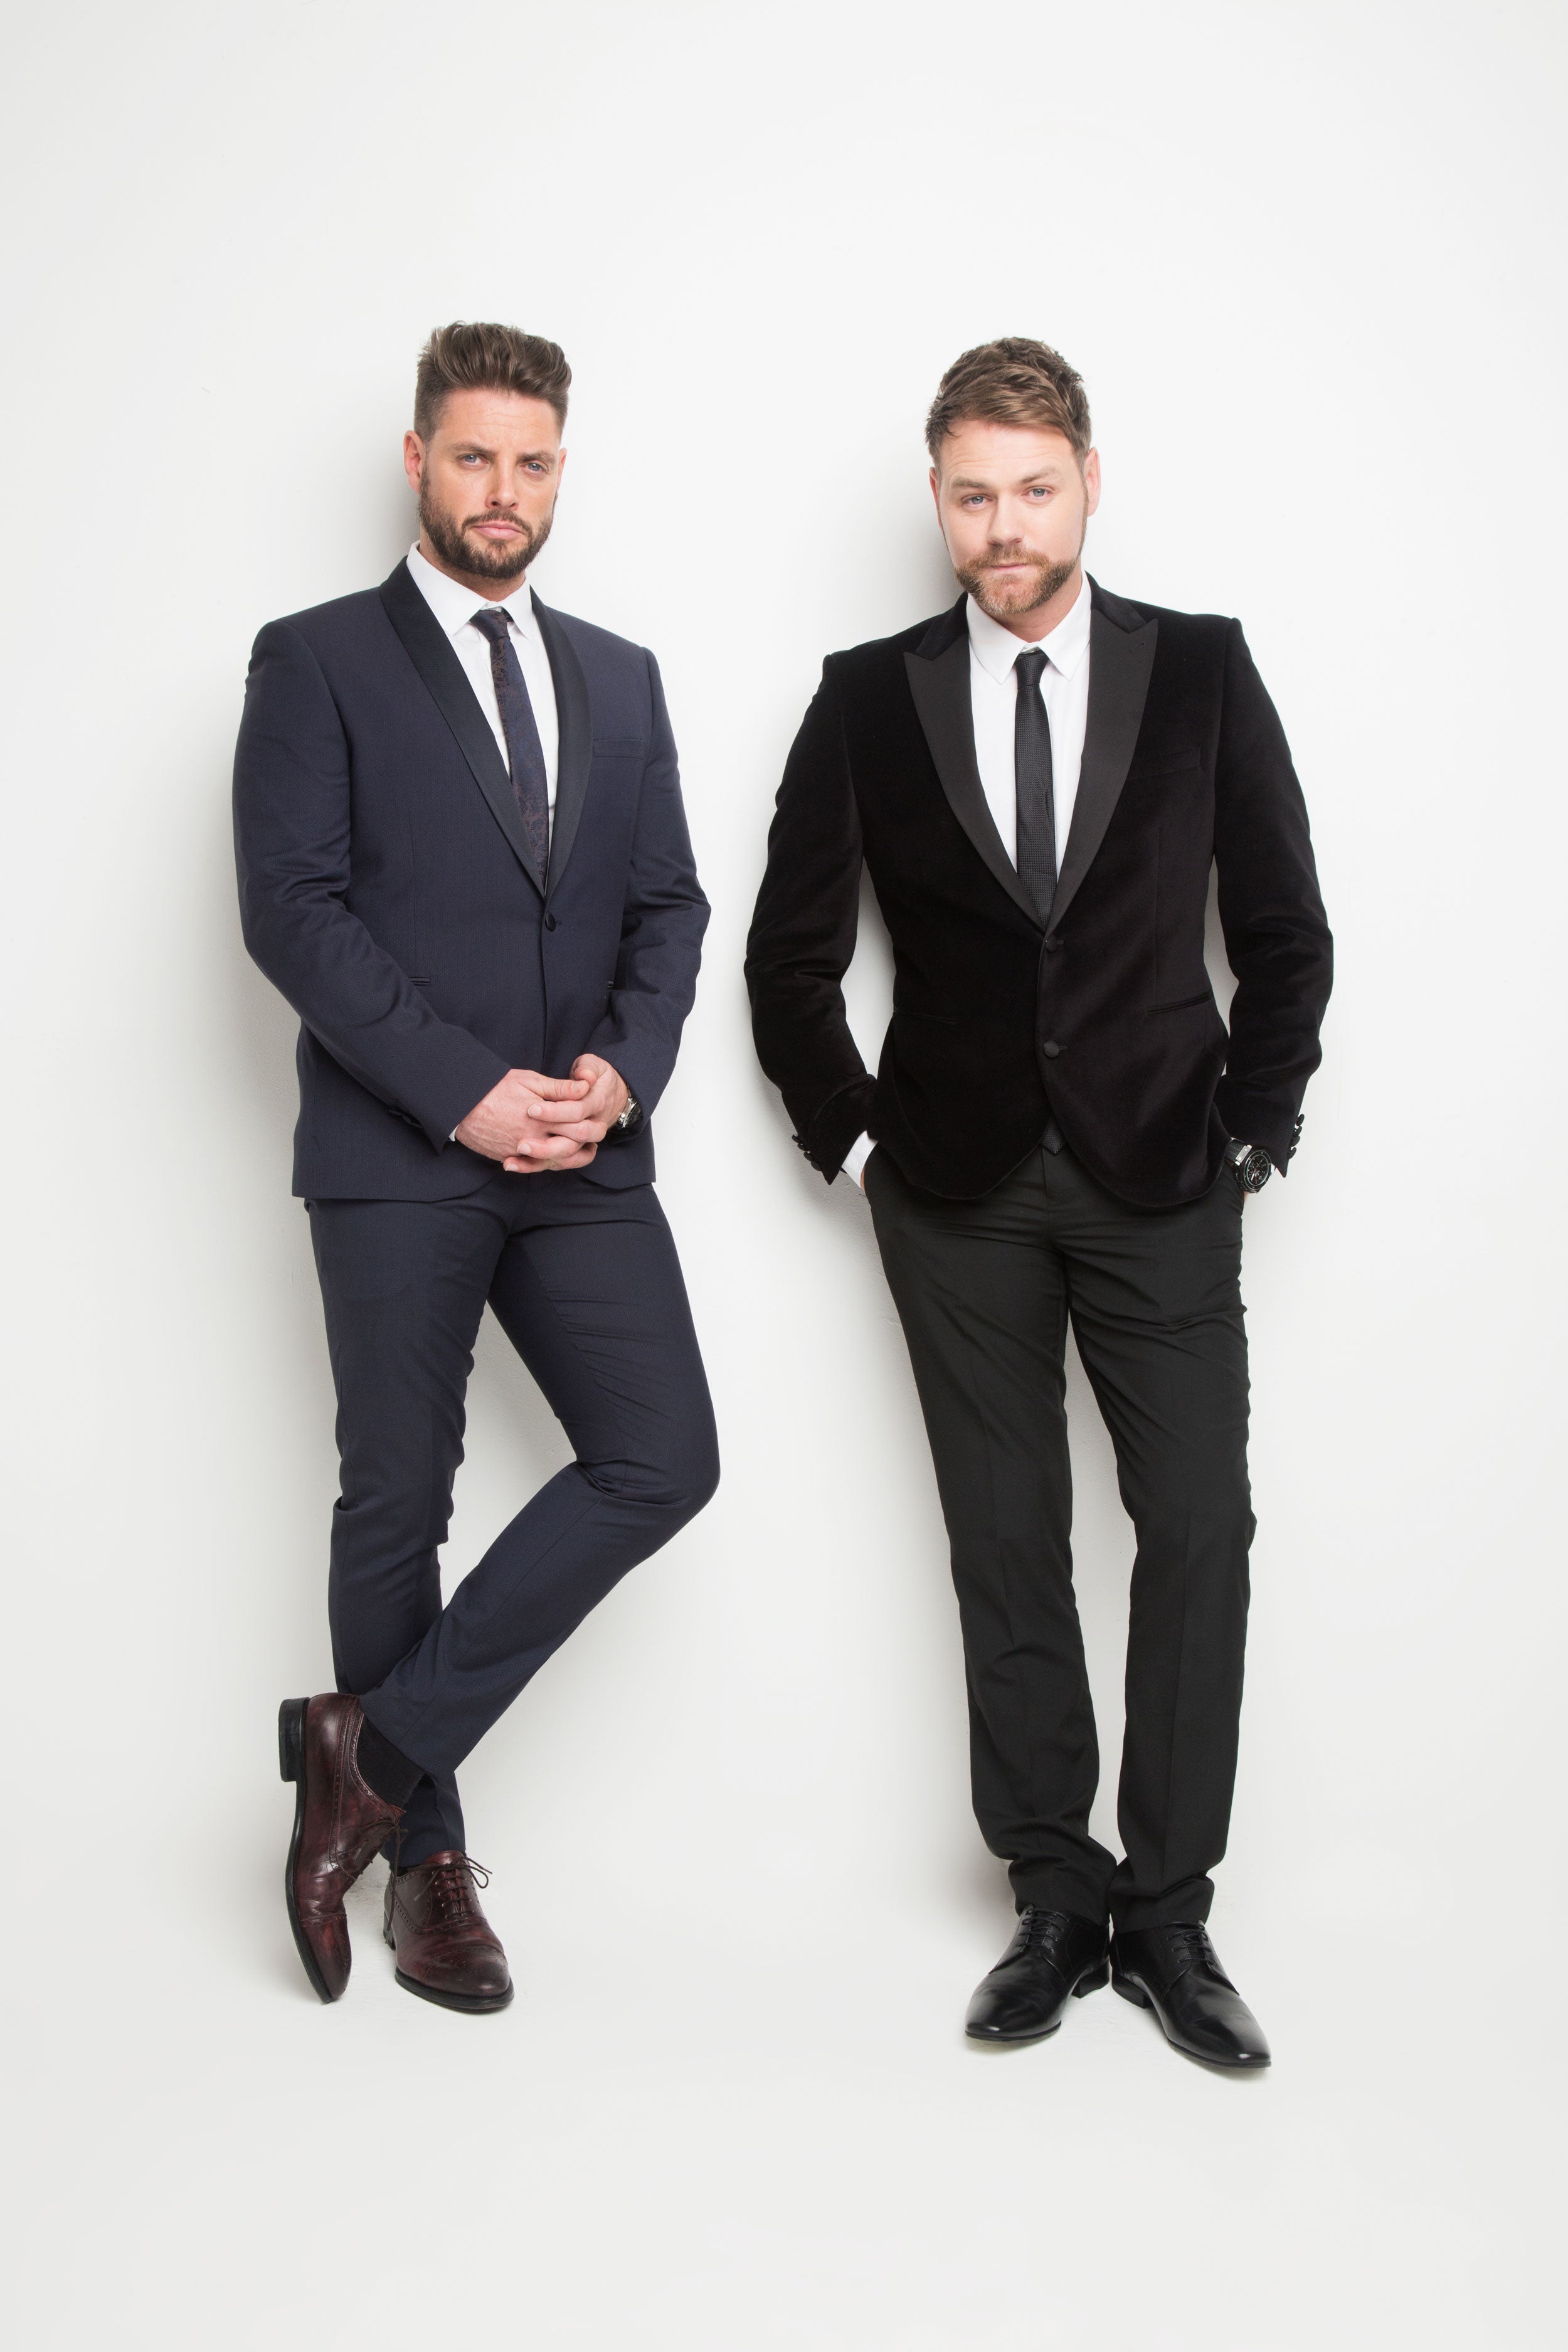 Boyzlife Featuring Keith Duffy & Brian McFadden presale code for approved tickets in Basingstoke